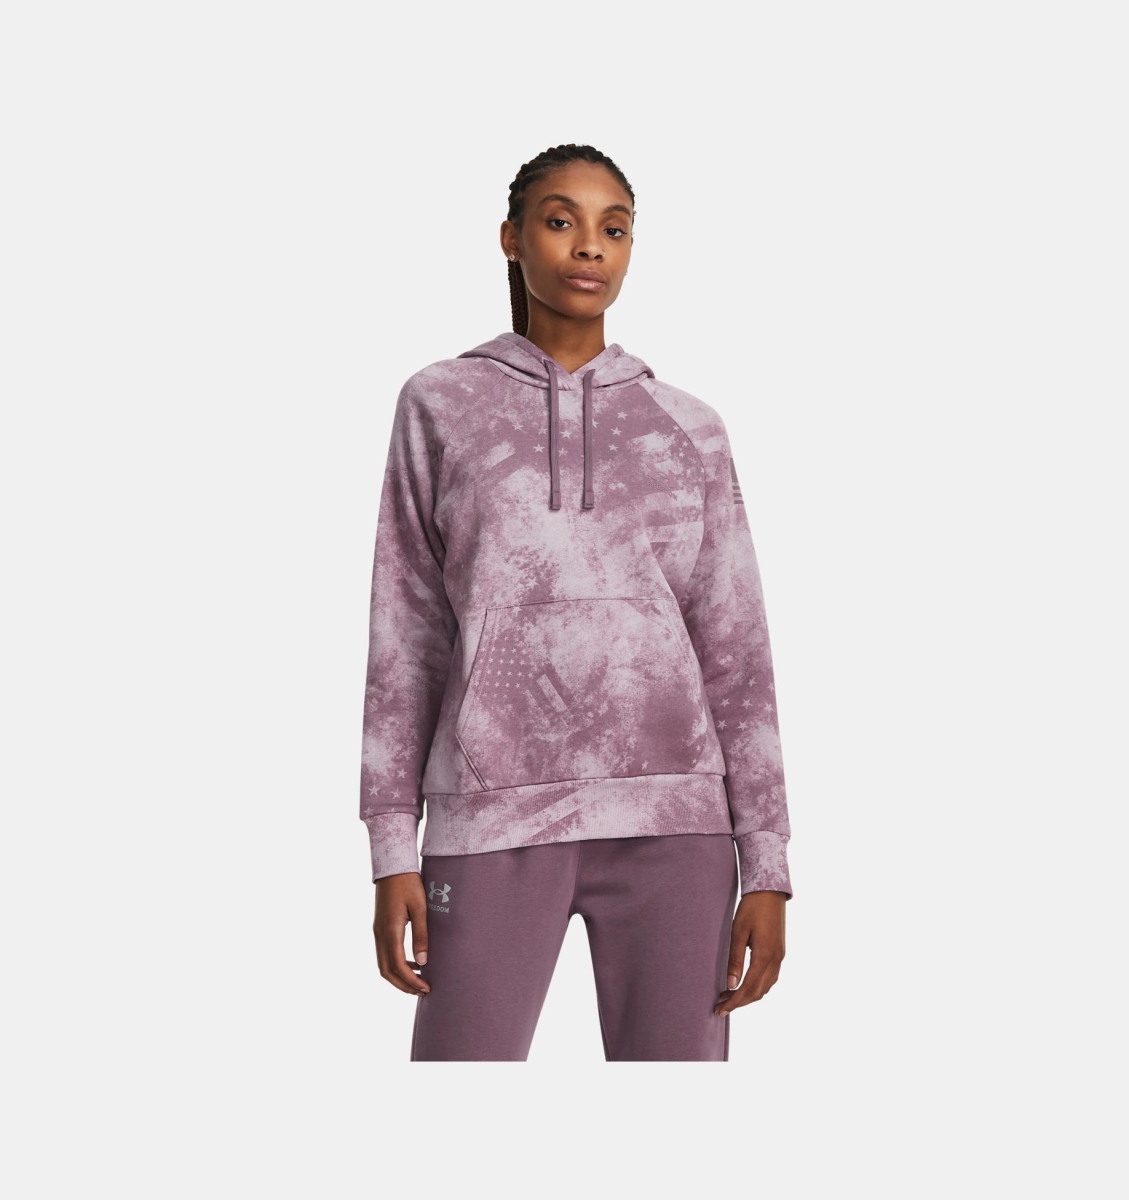 Under Armour 1379625500MD Women Freedom Rival Amp Hoodie, Misty Purple - Medium -  Inner Armour